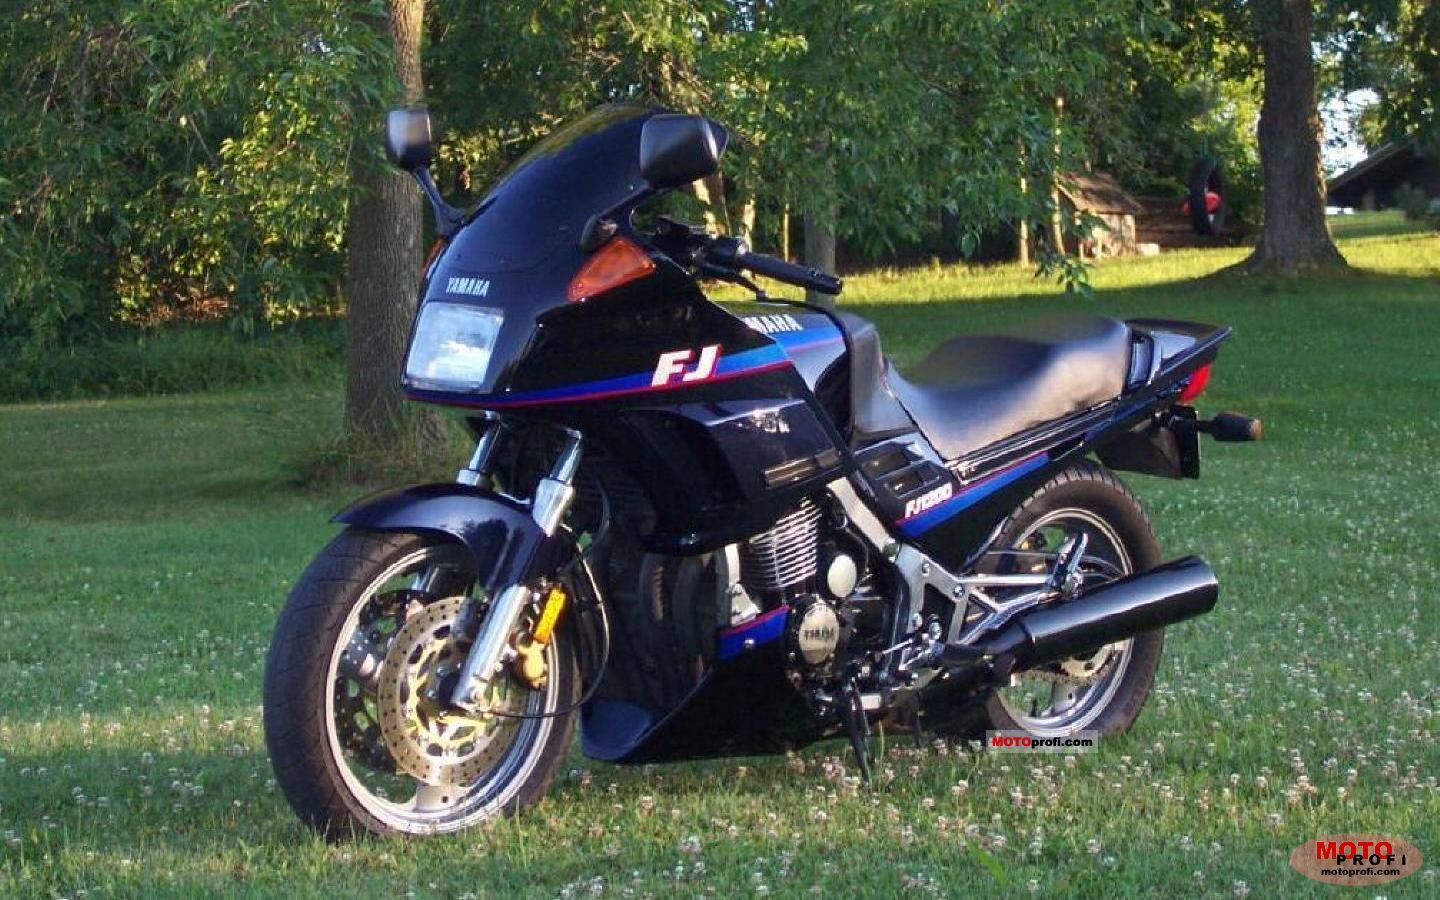 Overgivelse sortie Udpakning Yamaha FJ 1200 1990 Specs and Photos